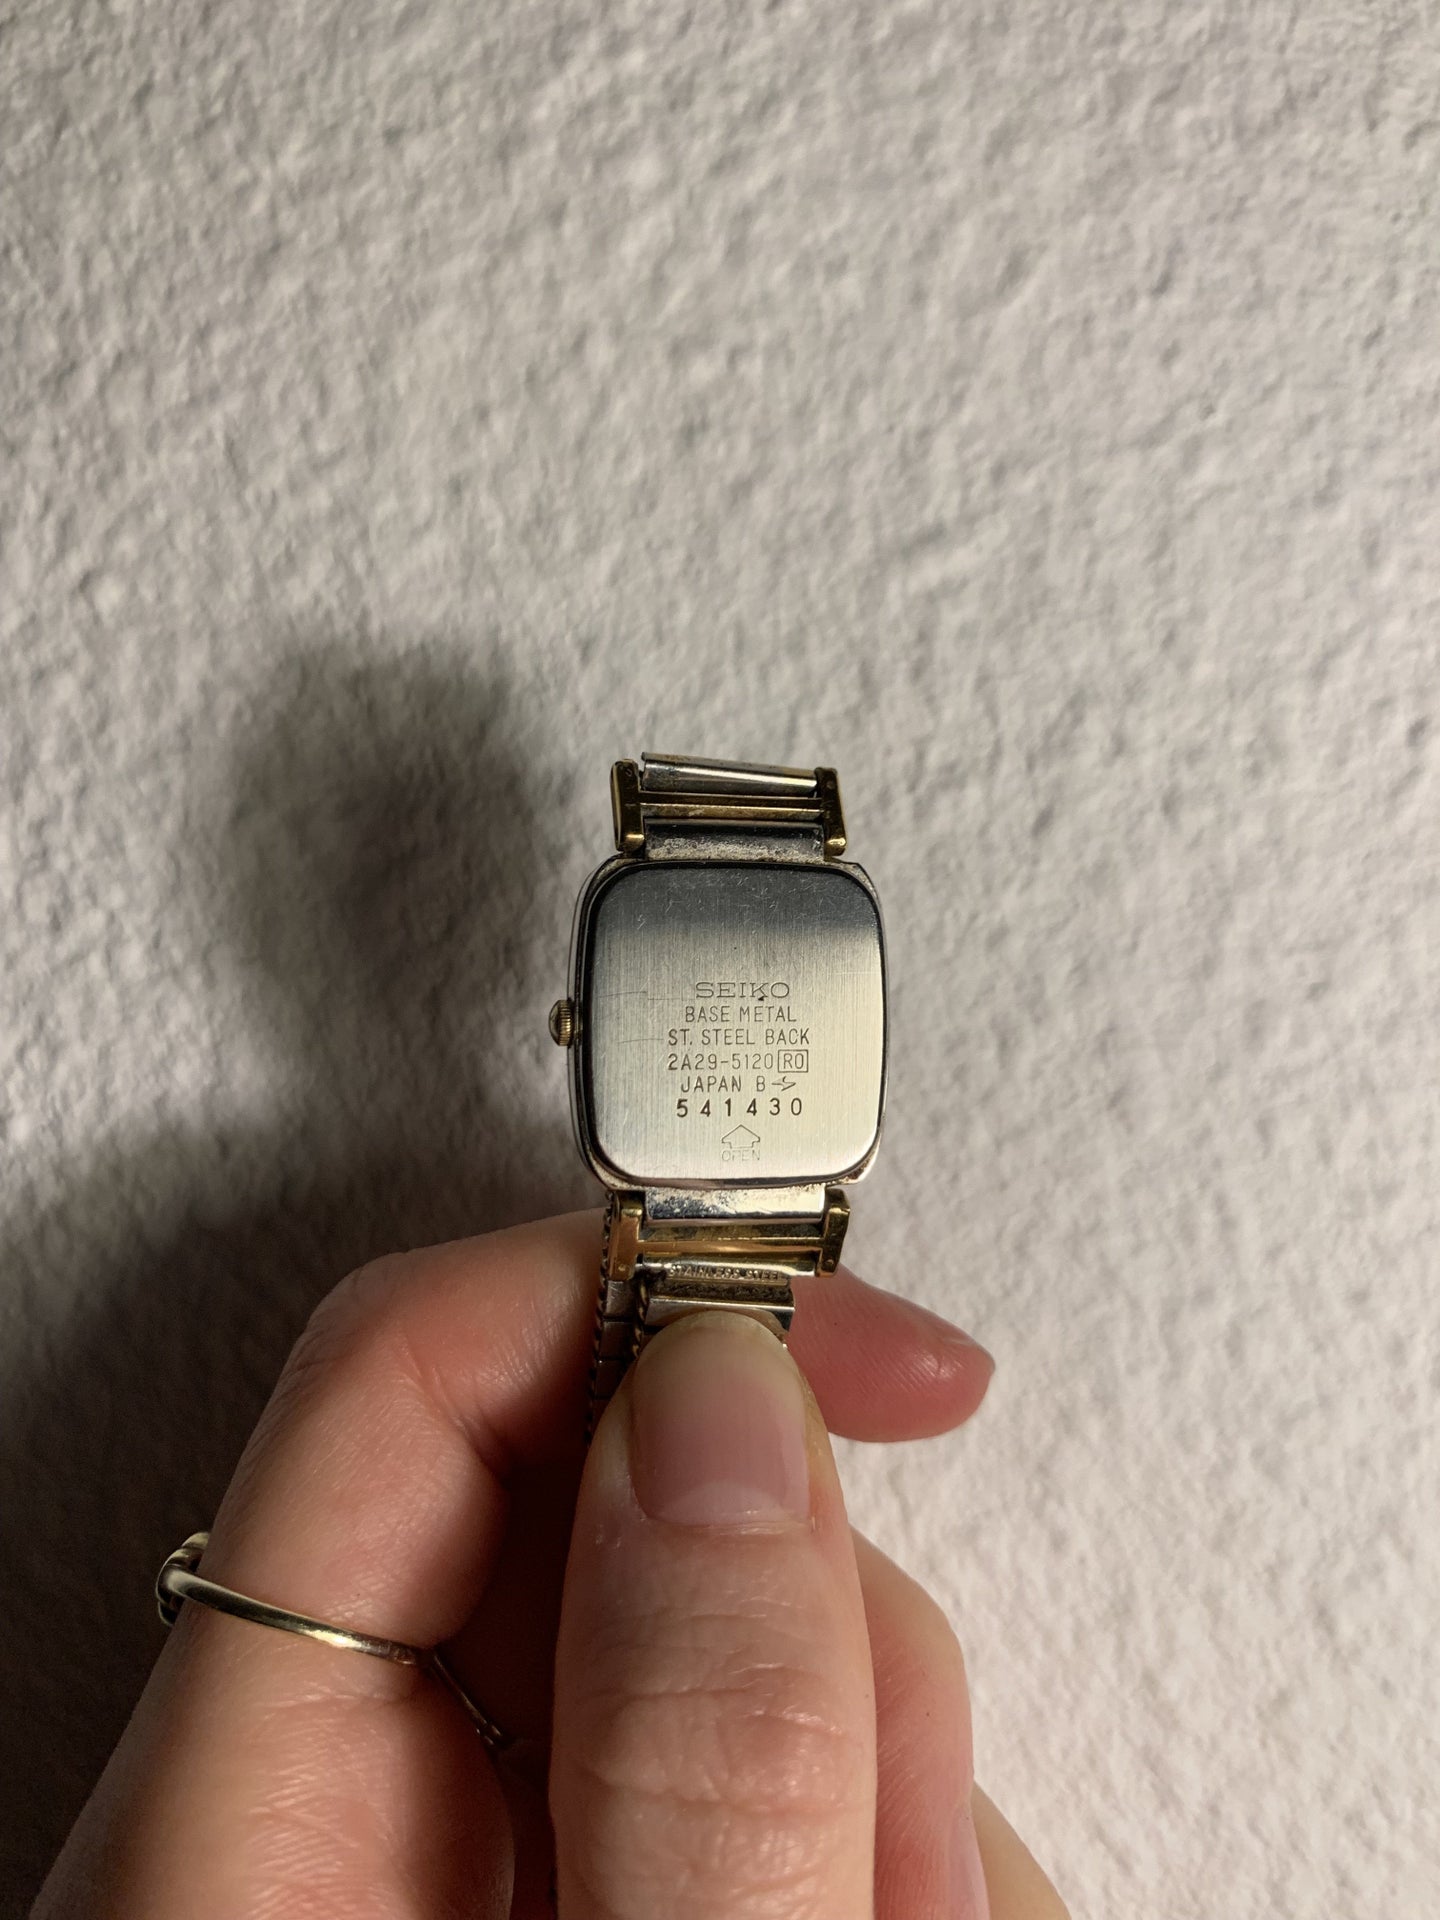 Does anbody know this vintage Seiko Quartz watch? | The Watch Site